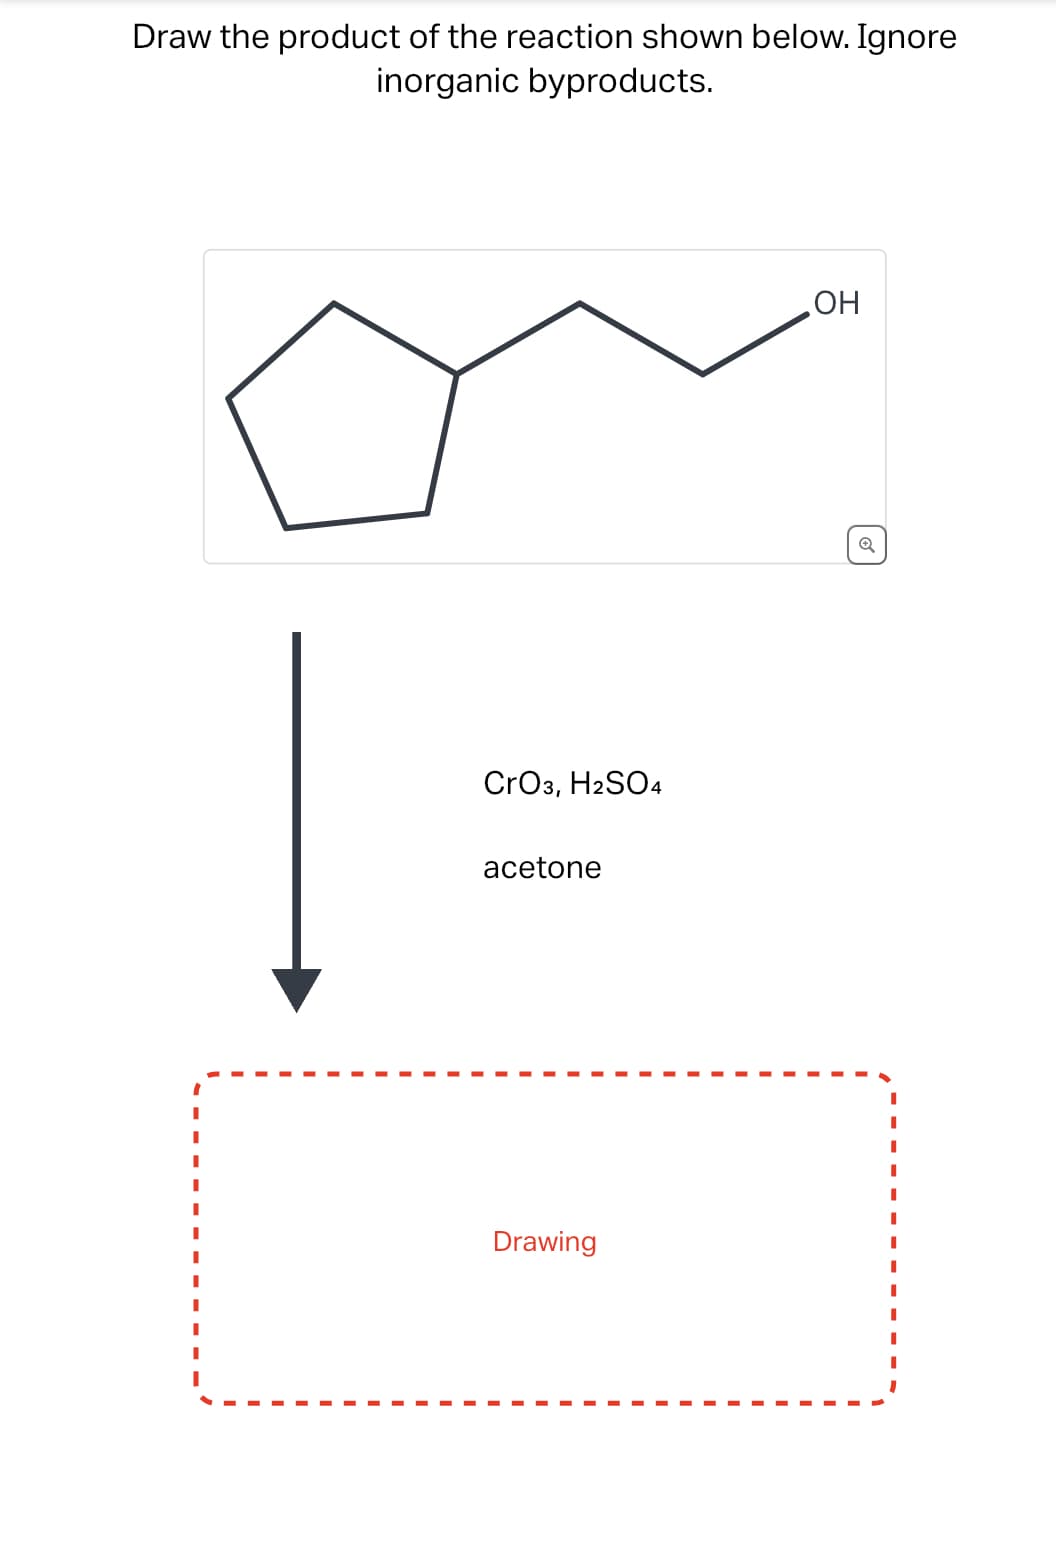 Draw the product of the reaction shown below. Ignore
inorganic byproducts.
CrO3, H2SO4
acetone
Drawing
OH
Q